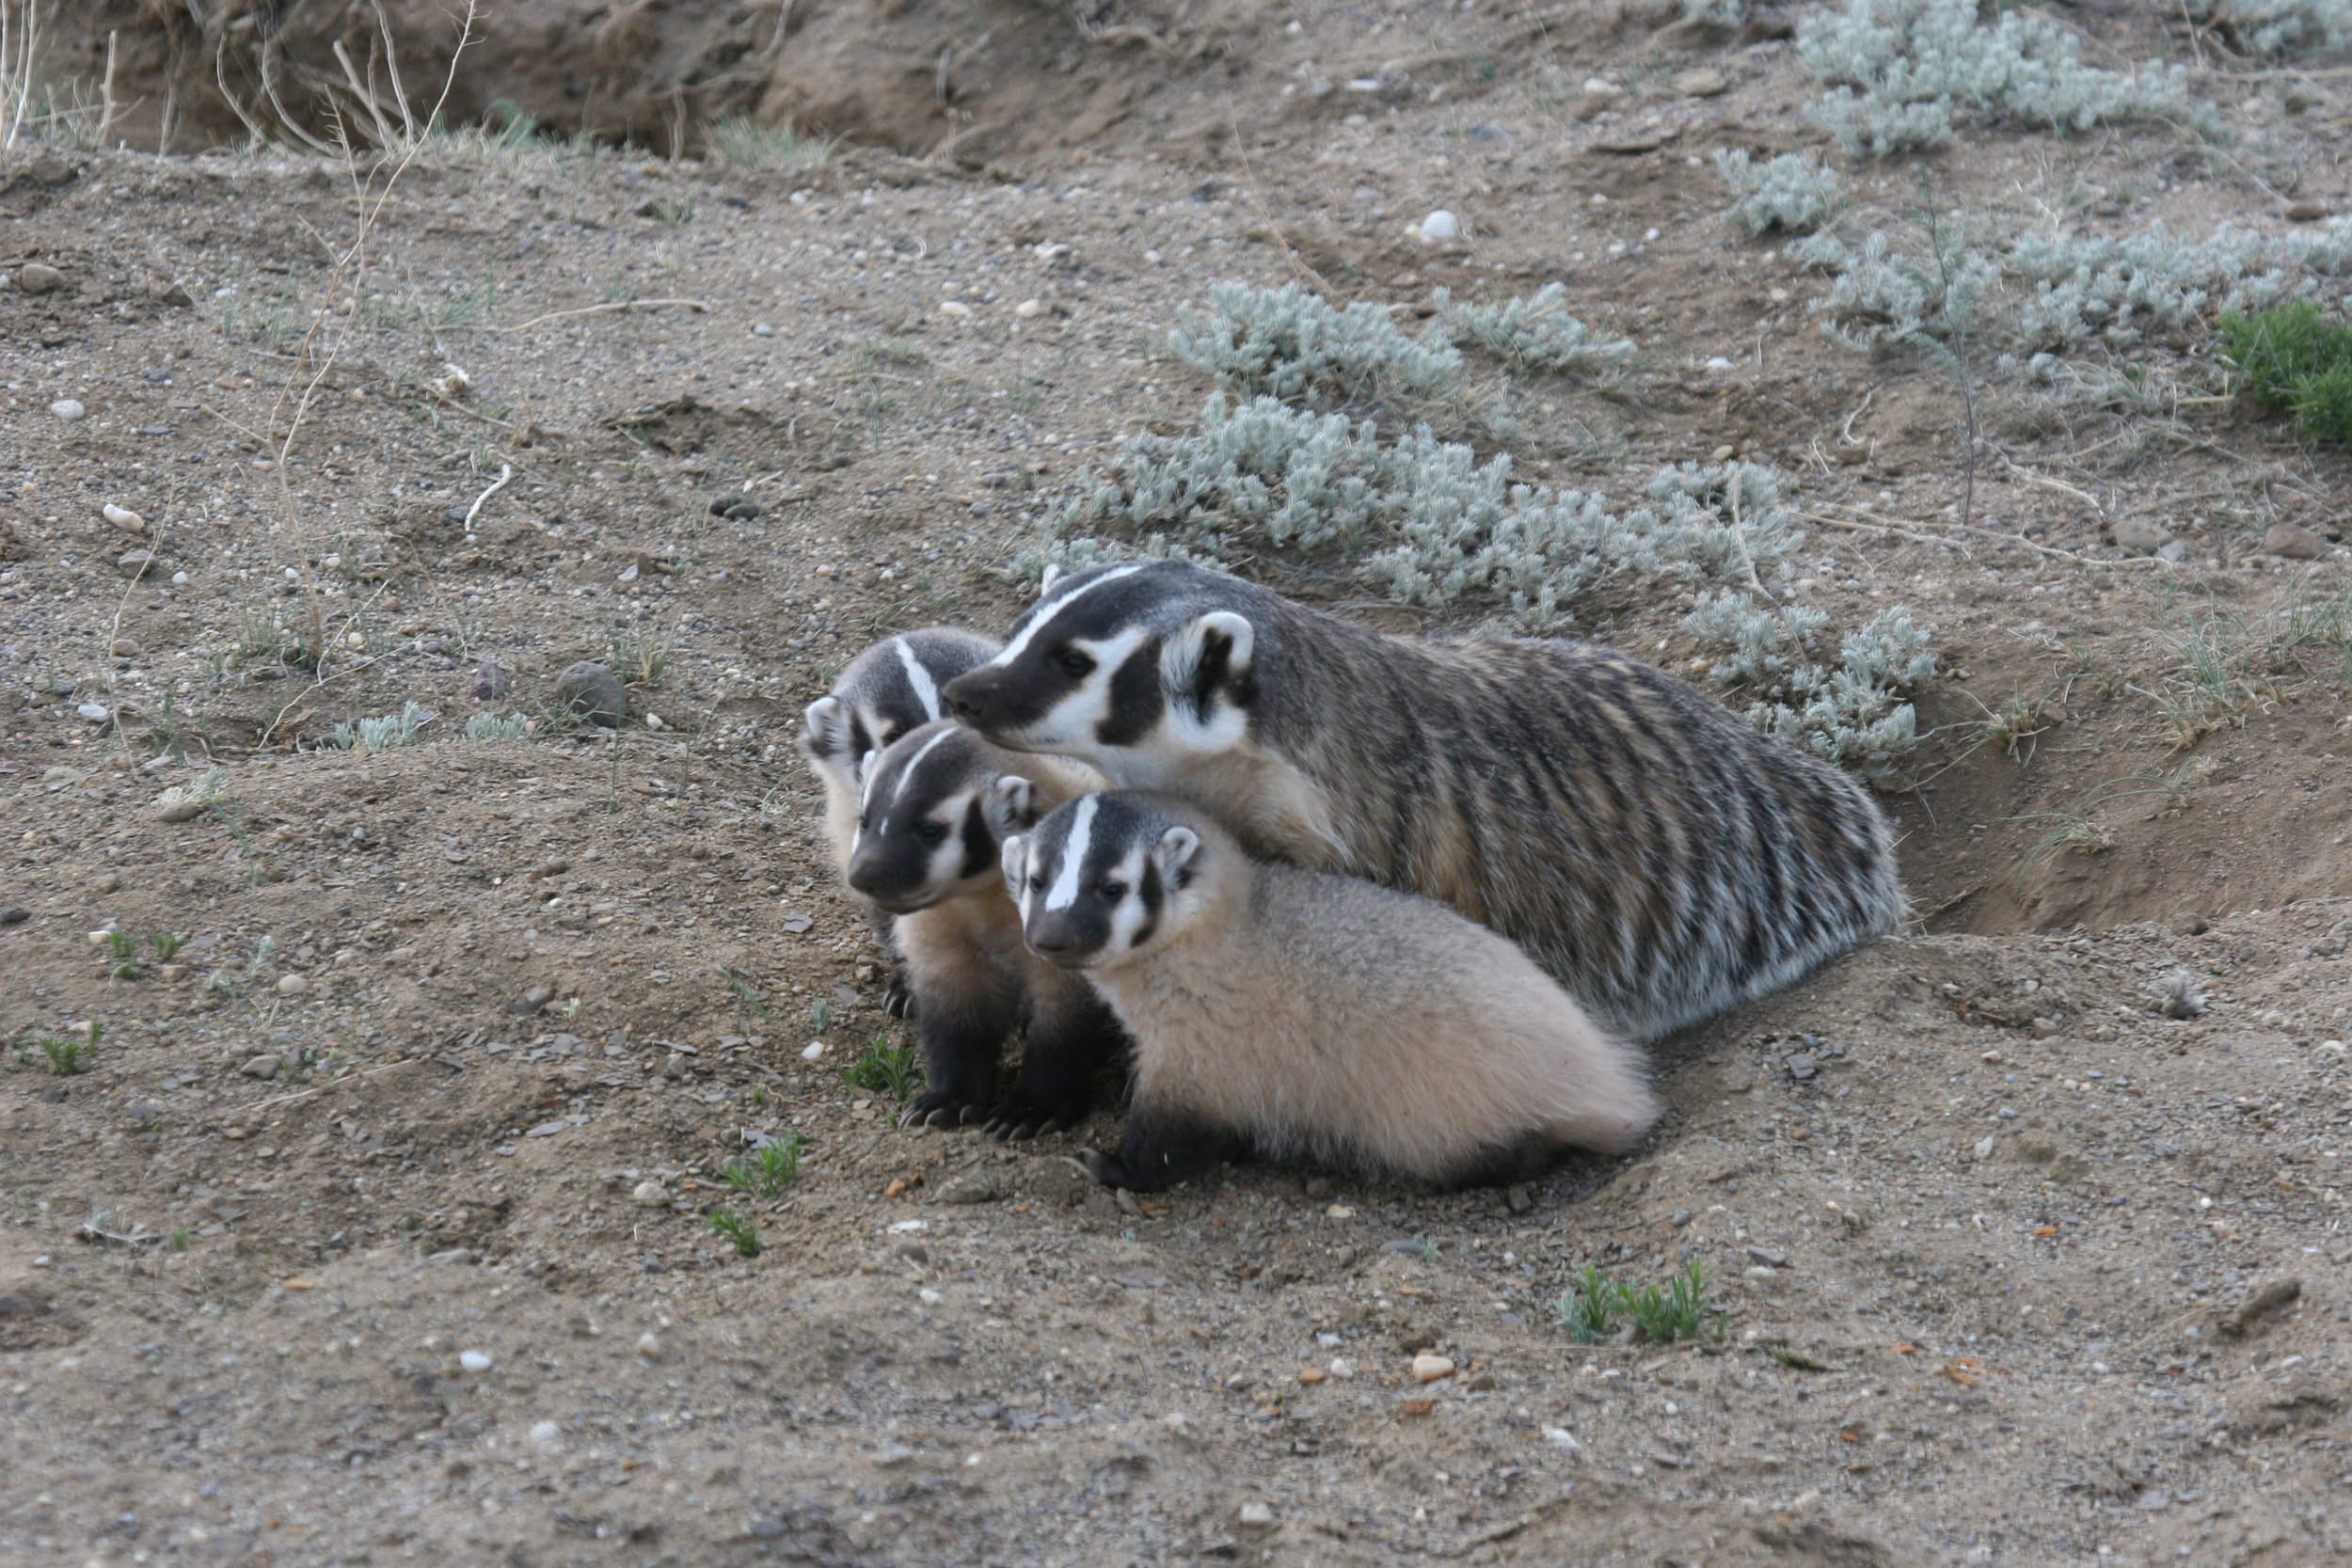  This badger mother must hunt almost nonstop to feed her growing offspring.  ©John Hoogland 2012  